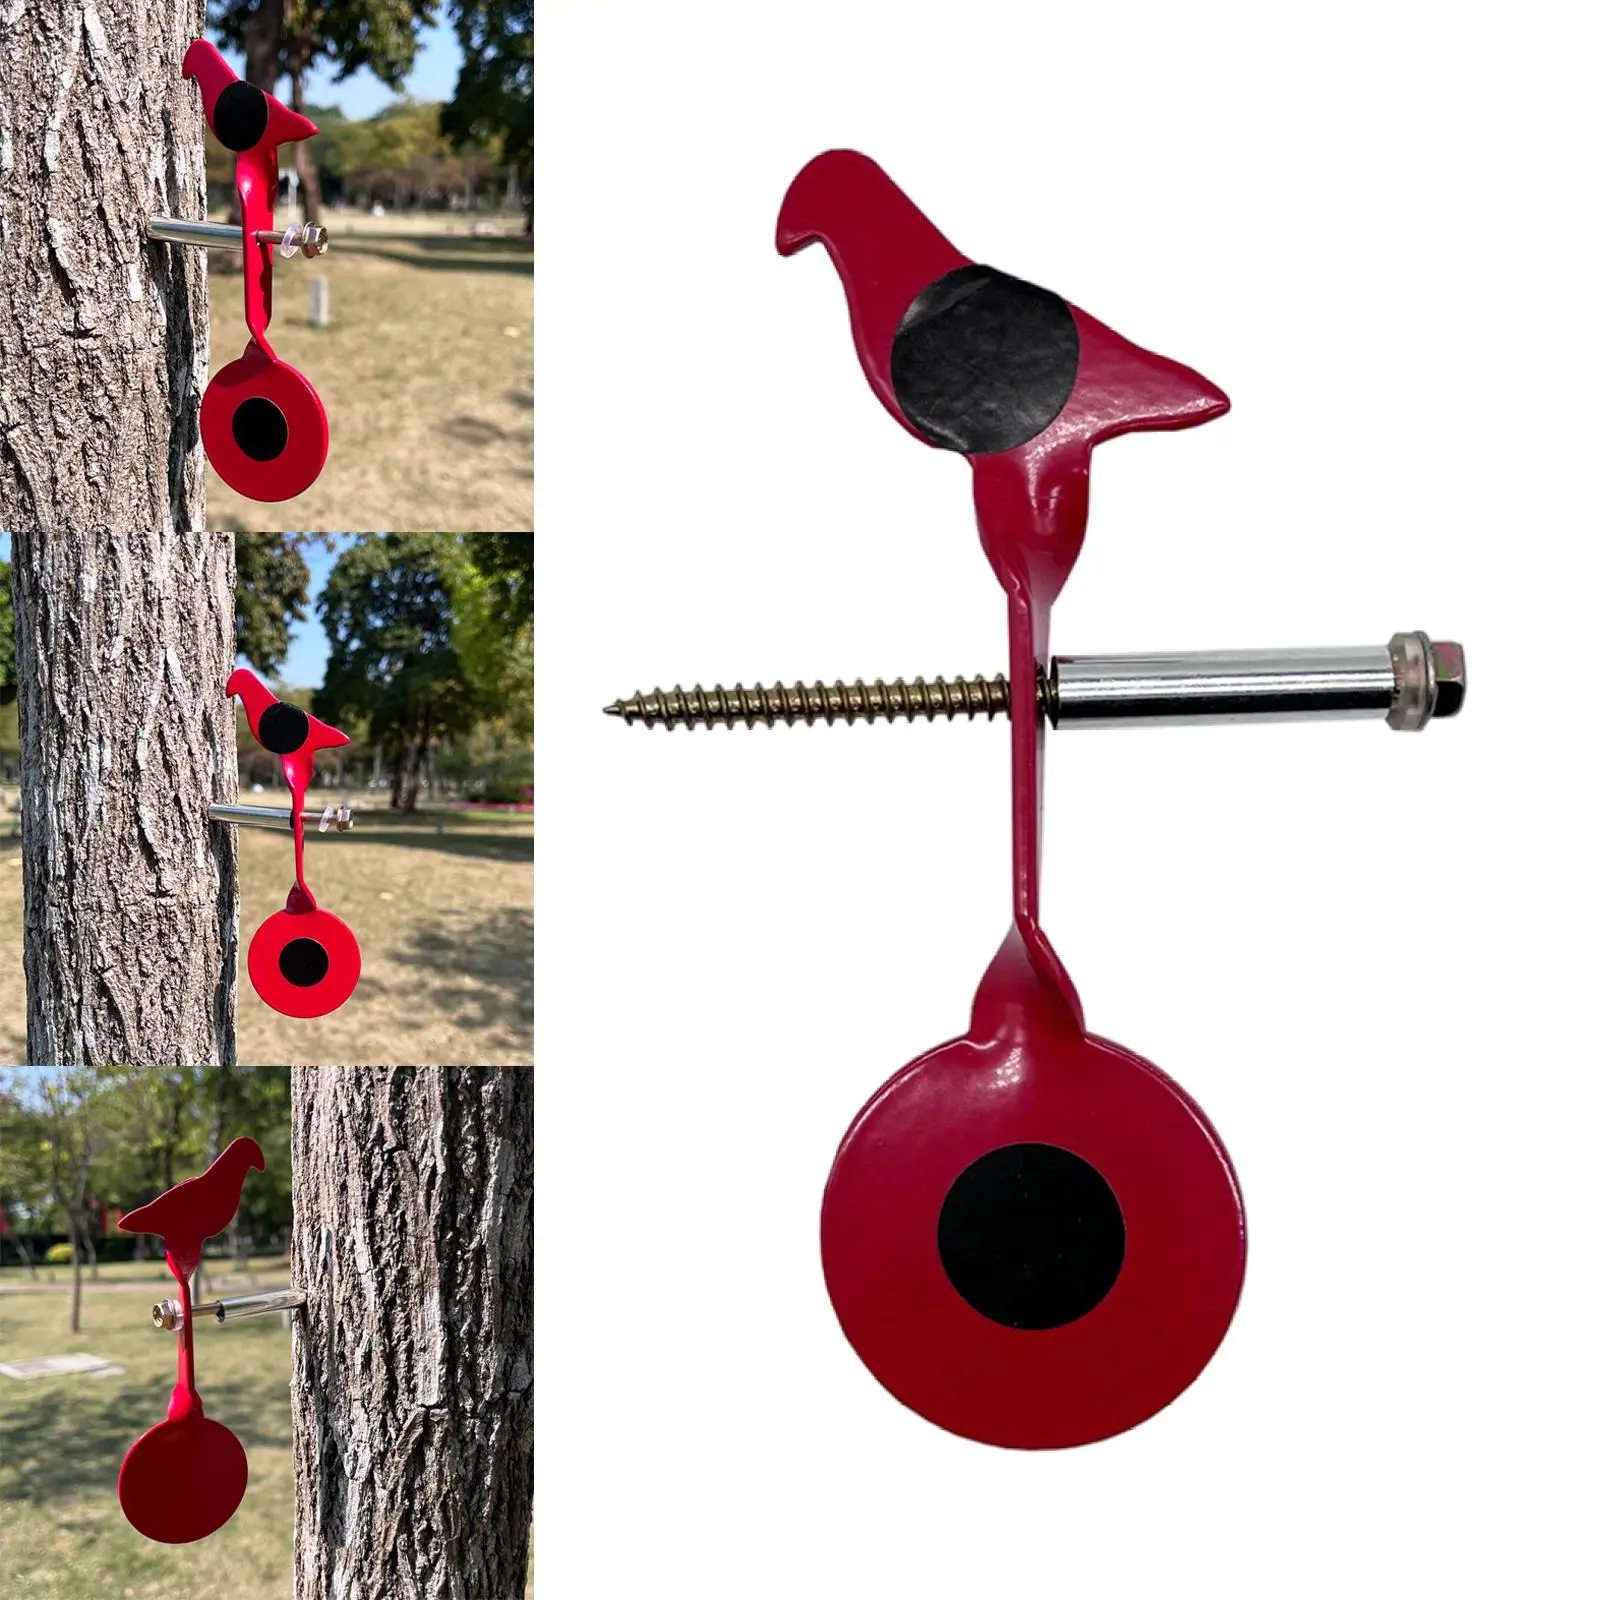 Shooting Target Plates Spinner Tree Wall Fixed Garden Backyard Resetting Target for Hunting